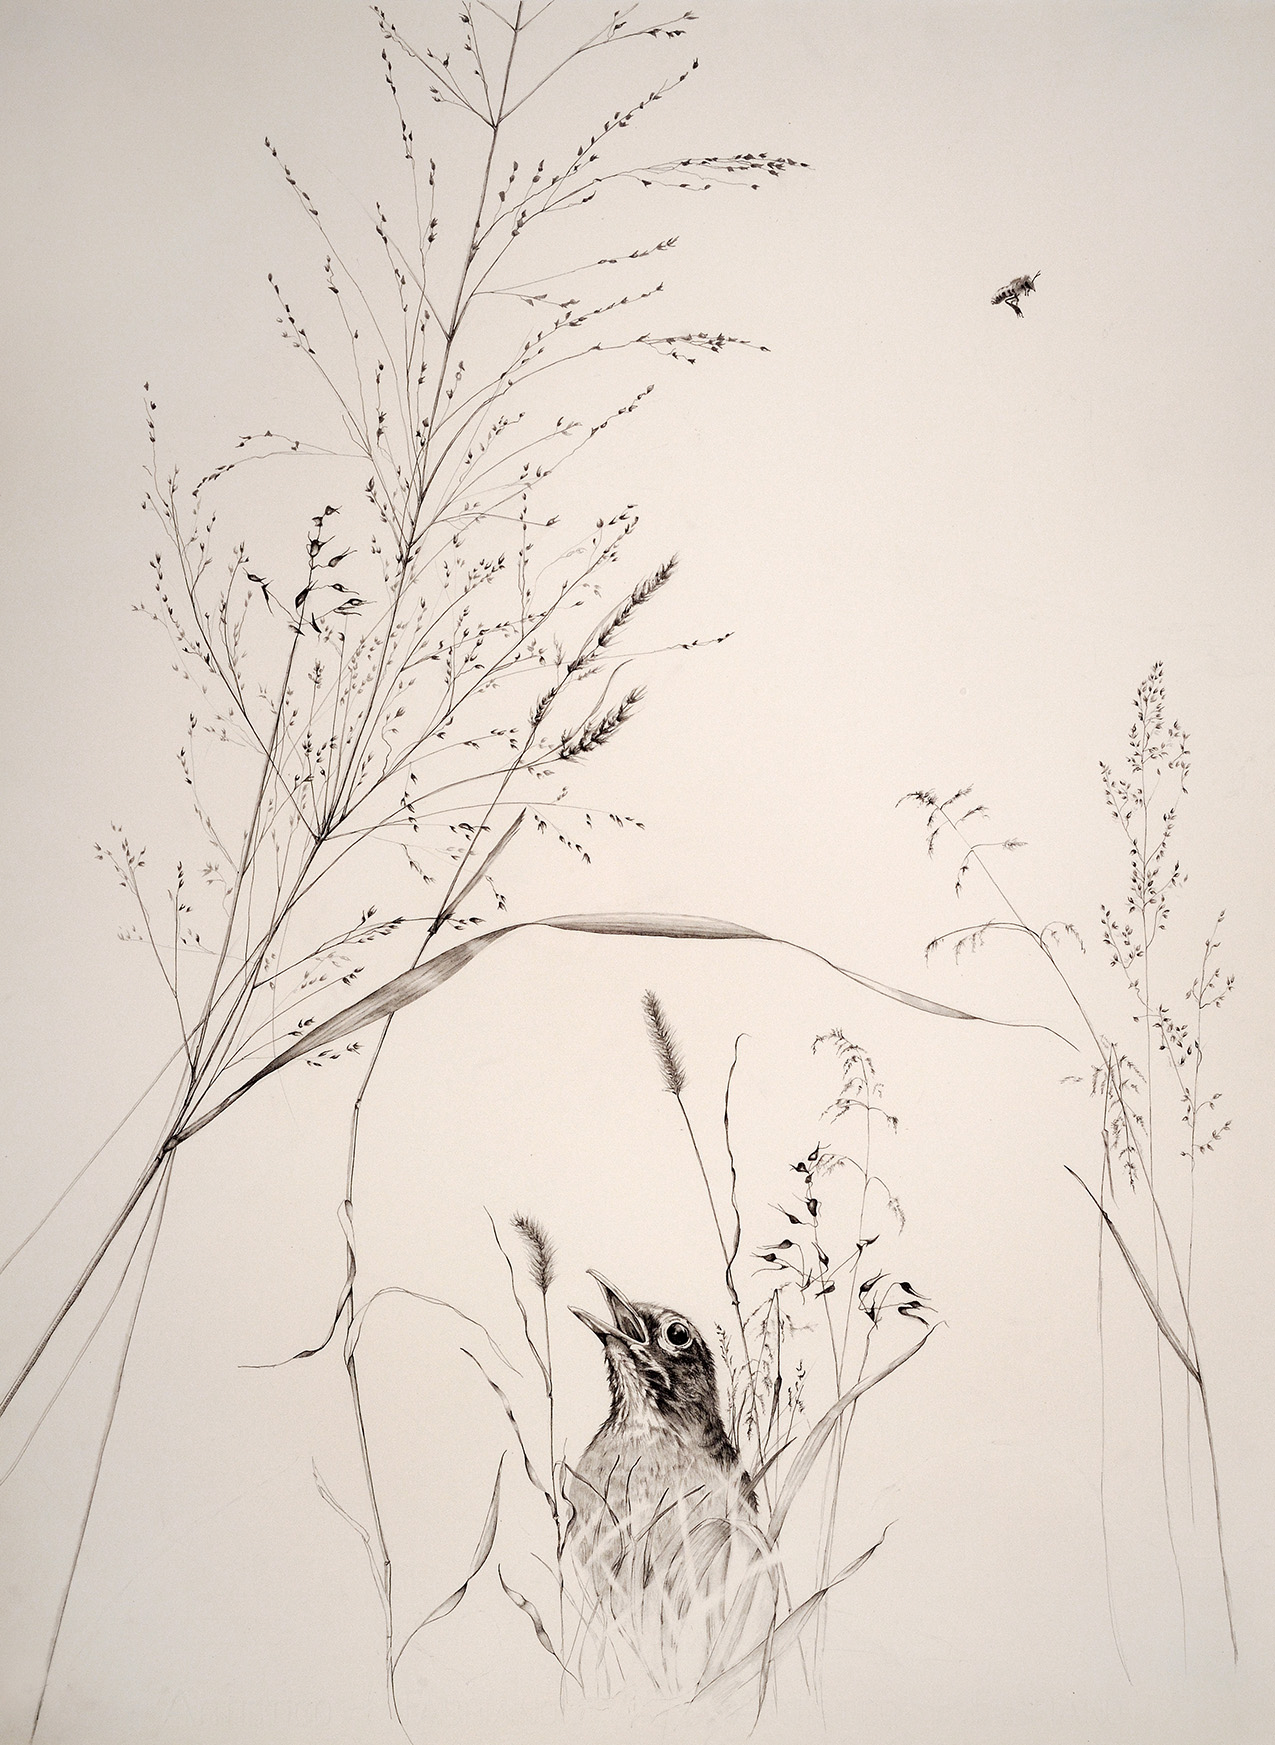 a sparse, realistic drawing of a songbird at the bottom of the frame with its mouth open amongst delicate prairie foliage; a bee flies in the upper right; the background is a warm gray without any details